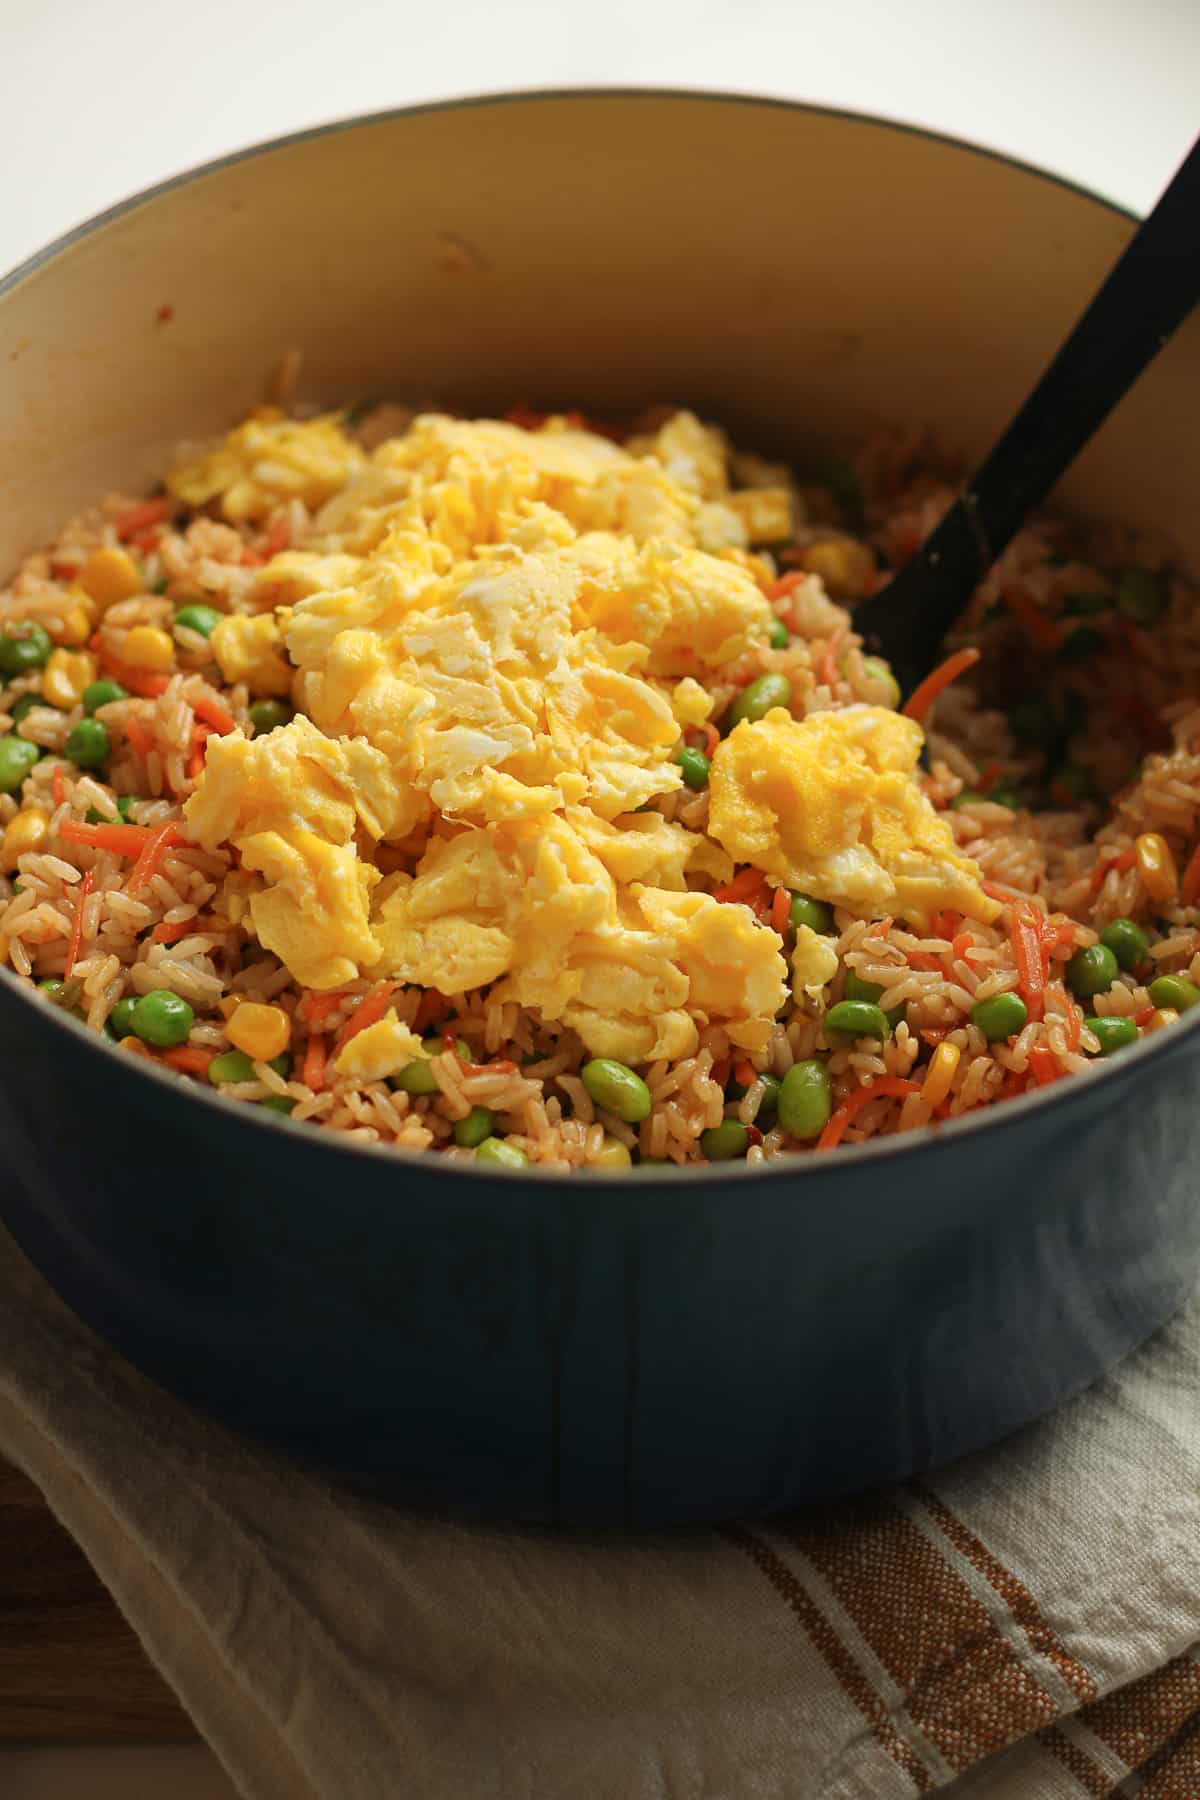 The stock pot with the fried rice plus eggs on top.